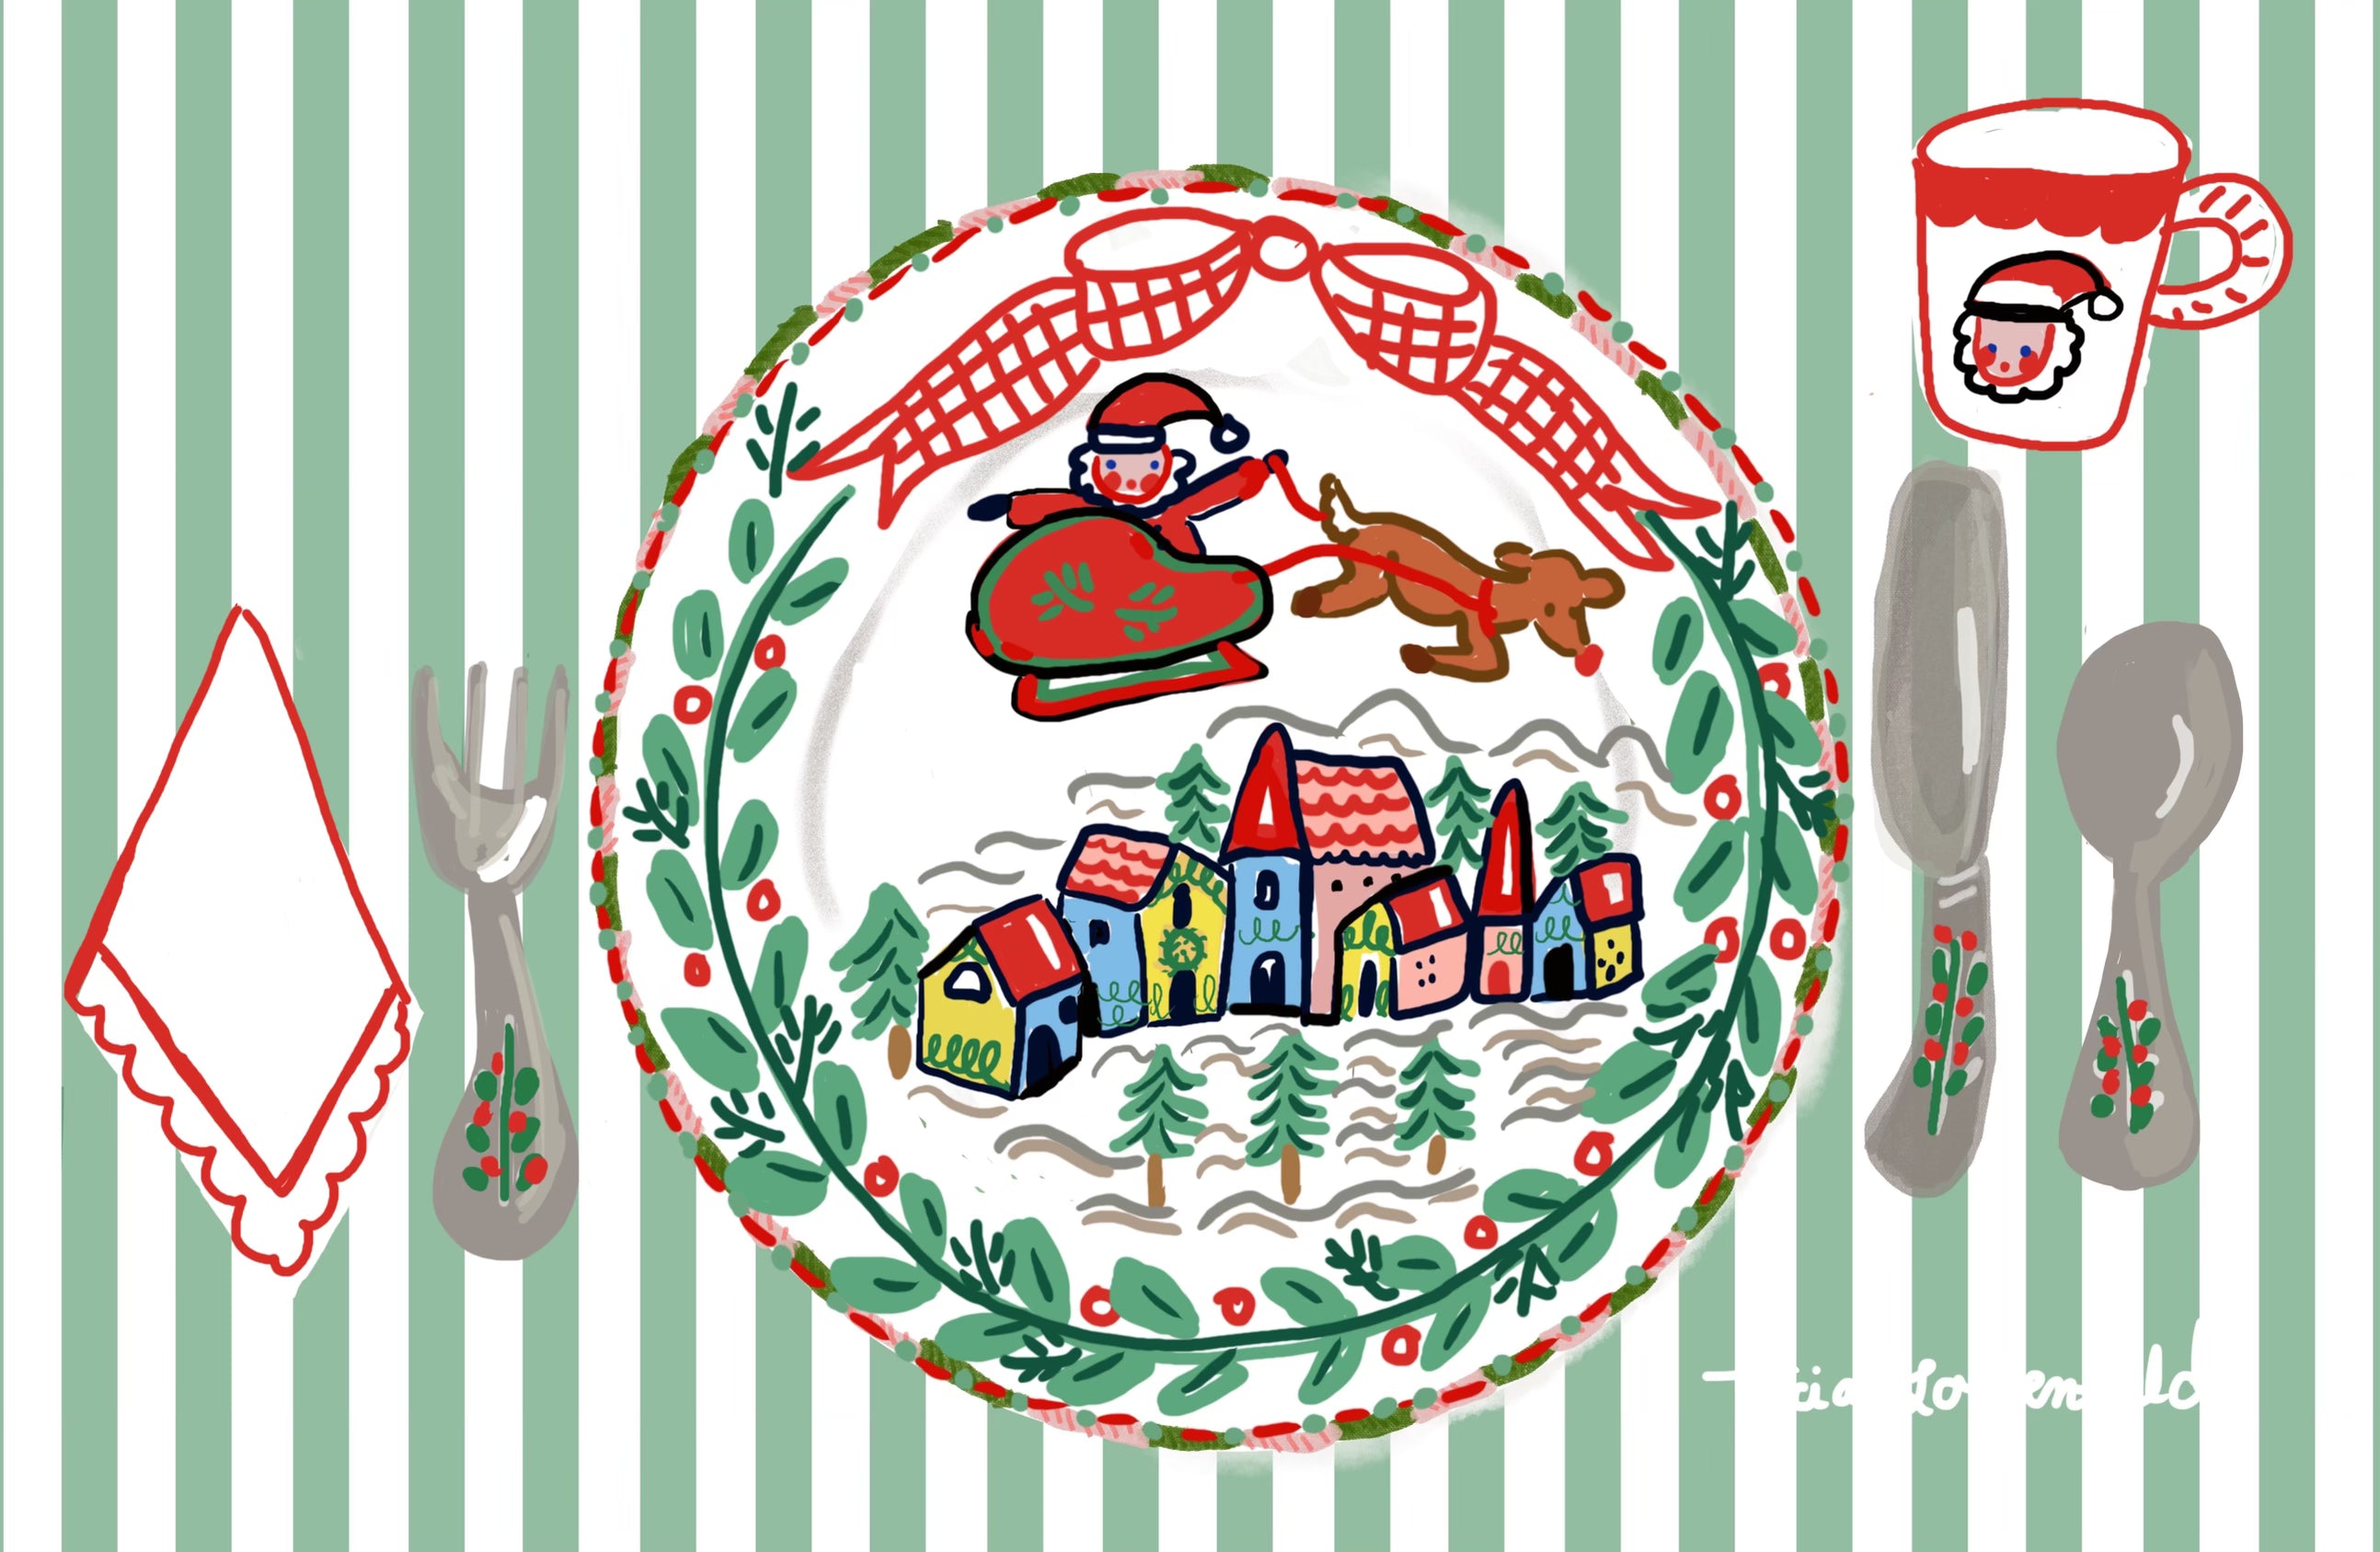 Set of 24 paper placemats - Santa and village